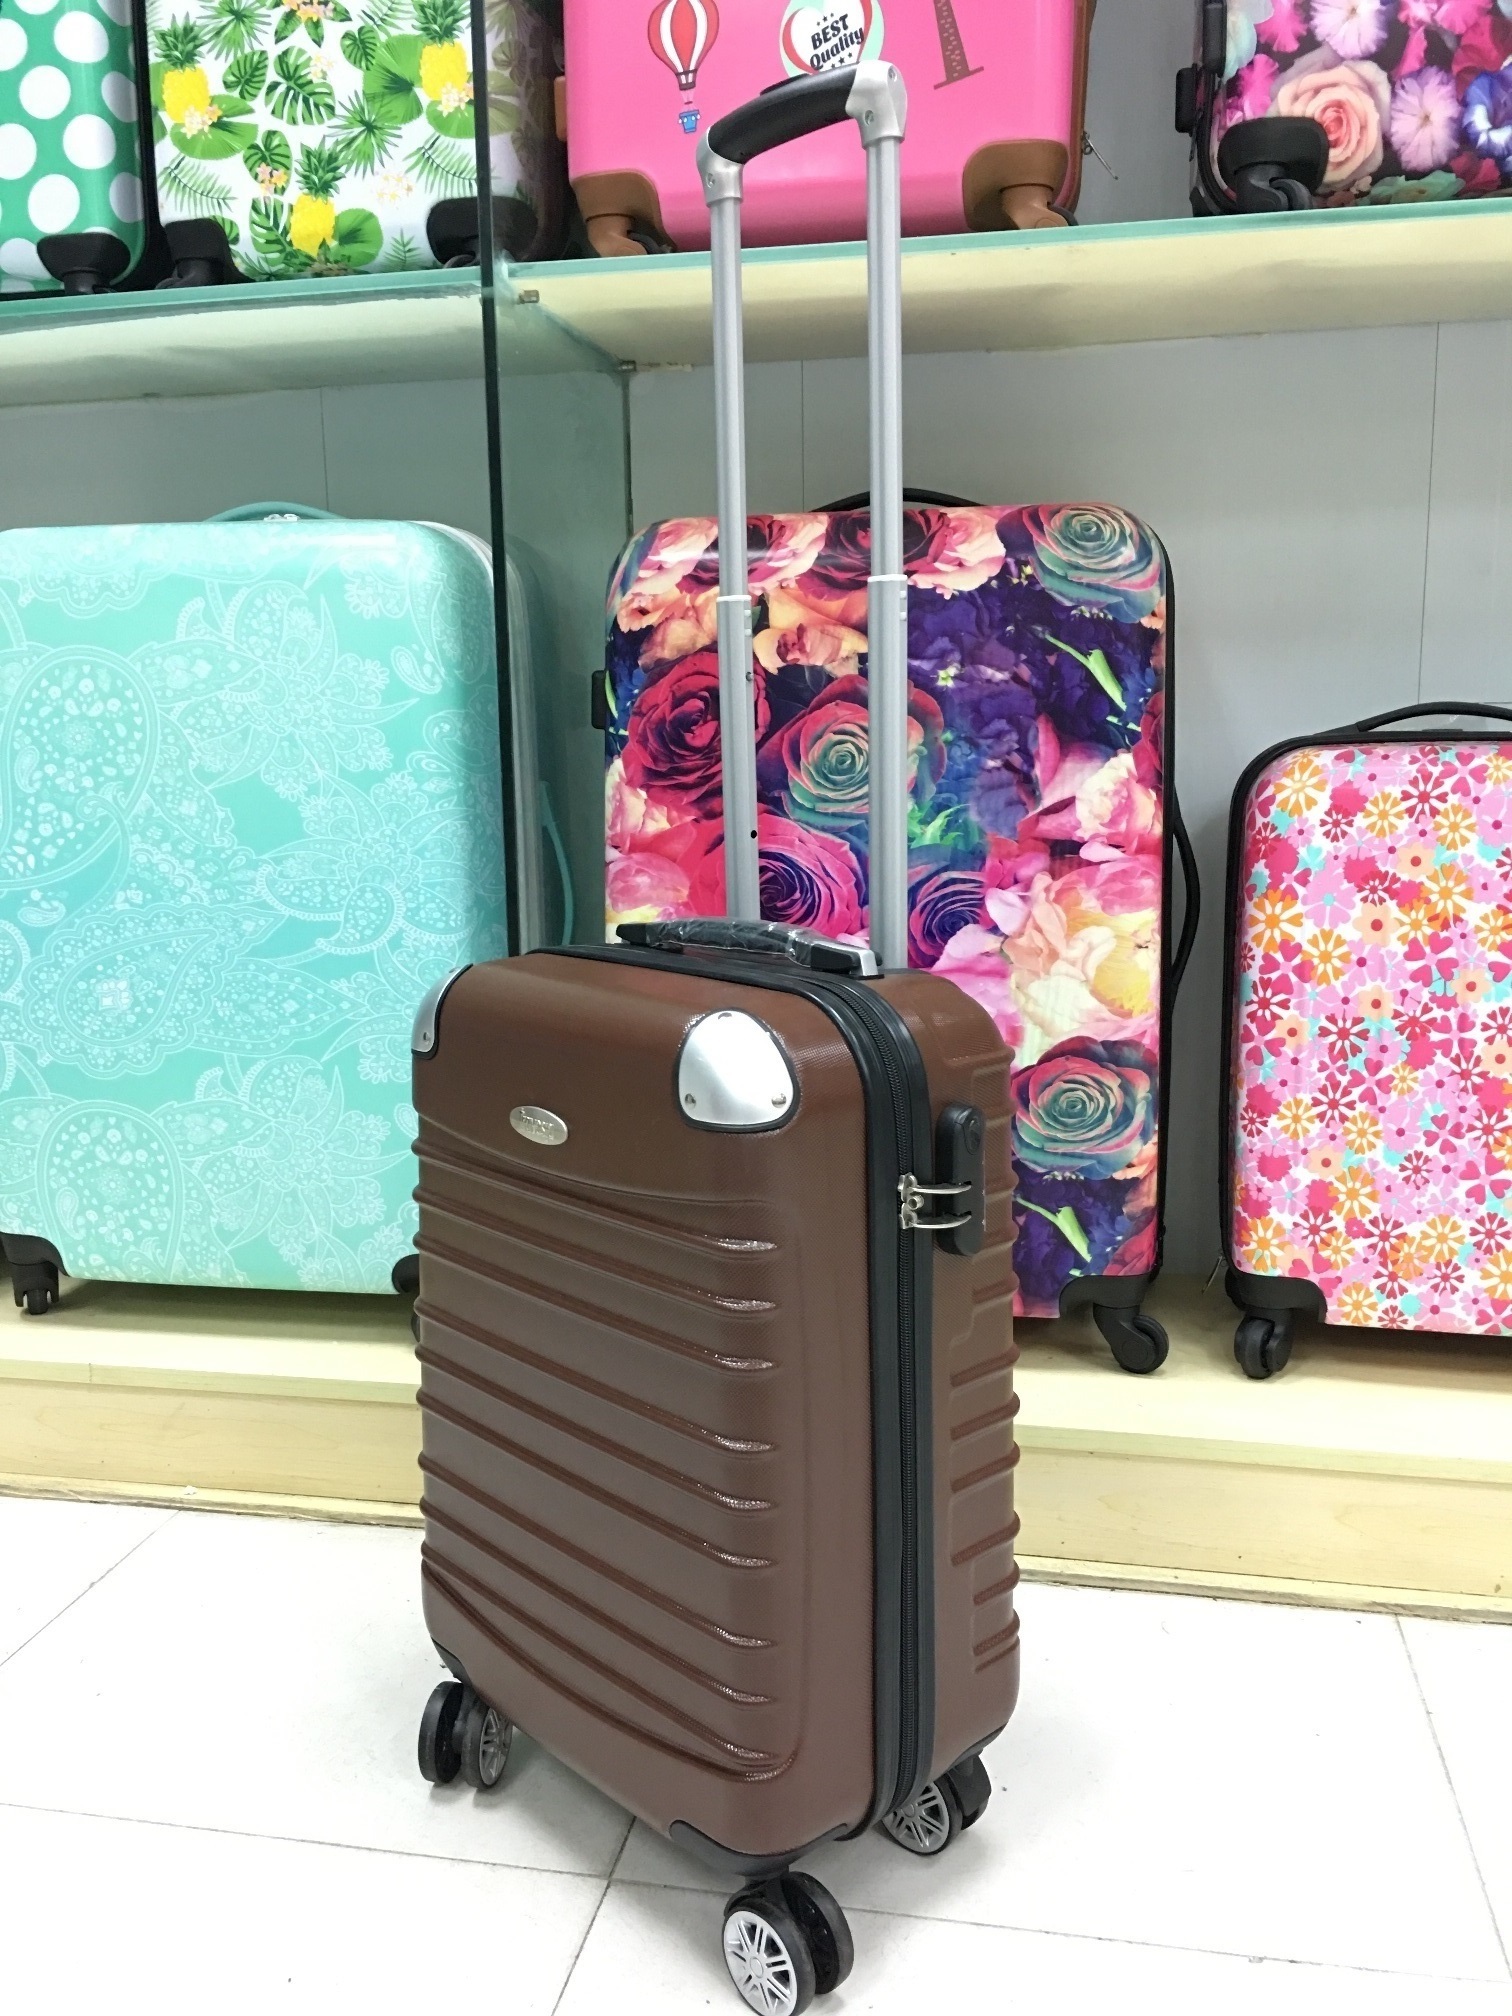 yanteng cheap carry on luggage in brown color